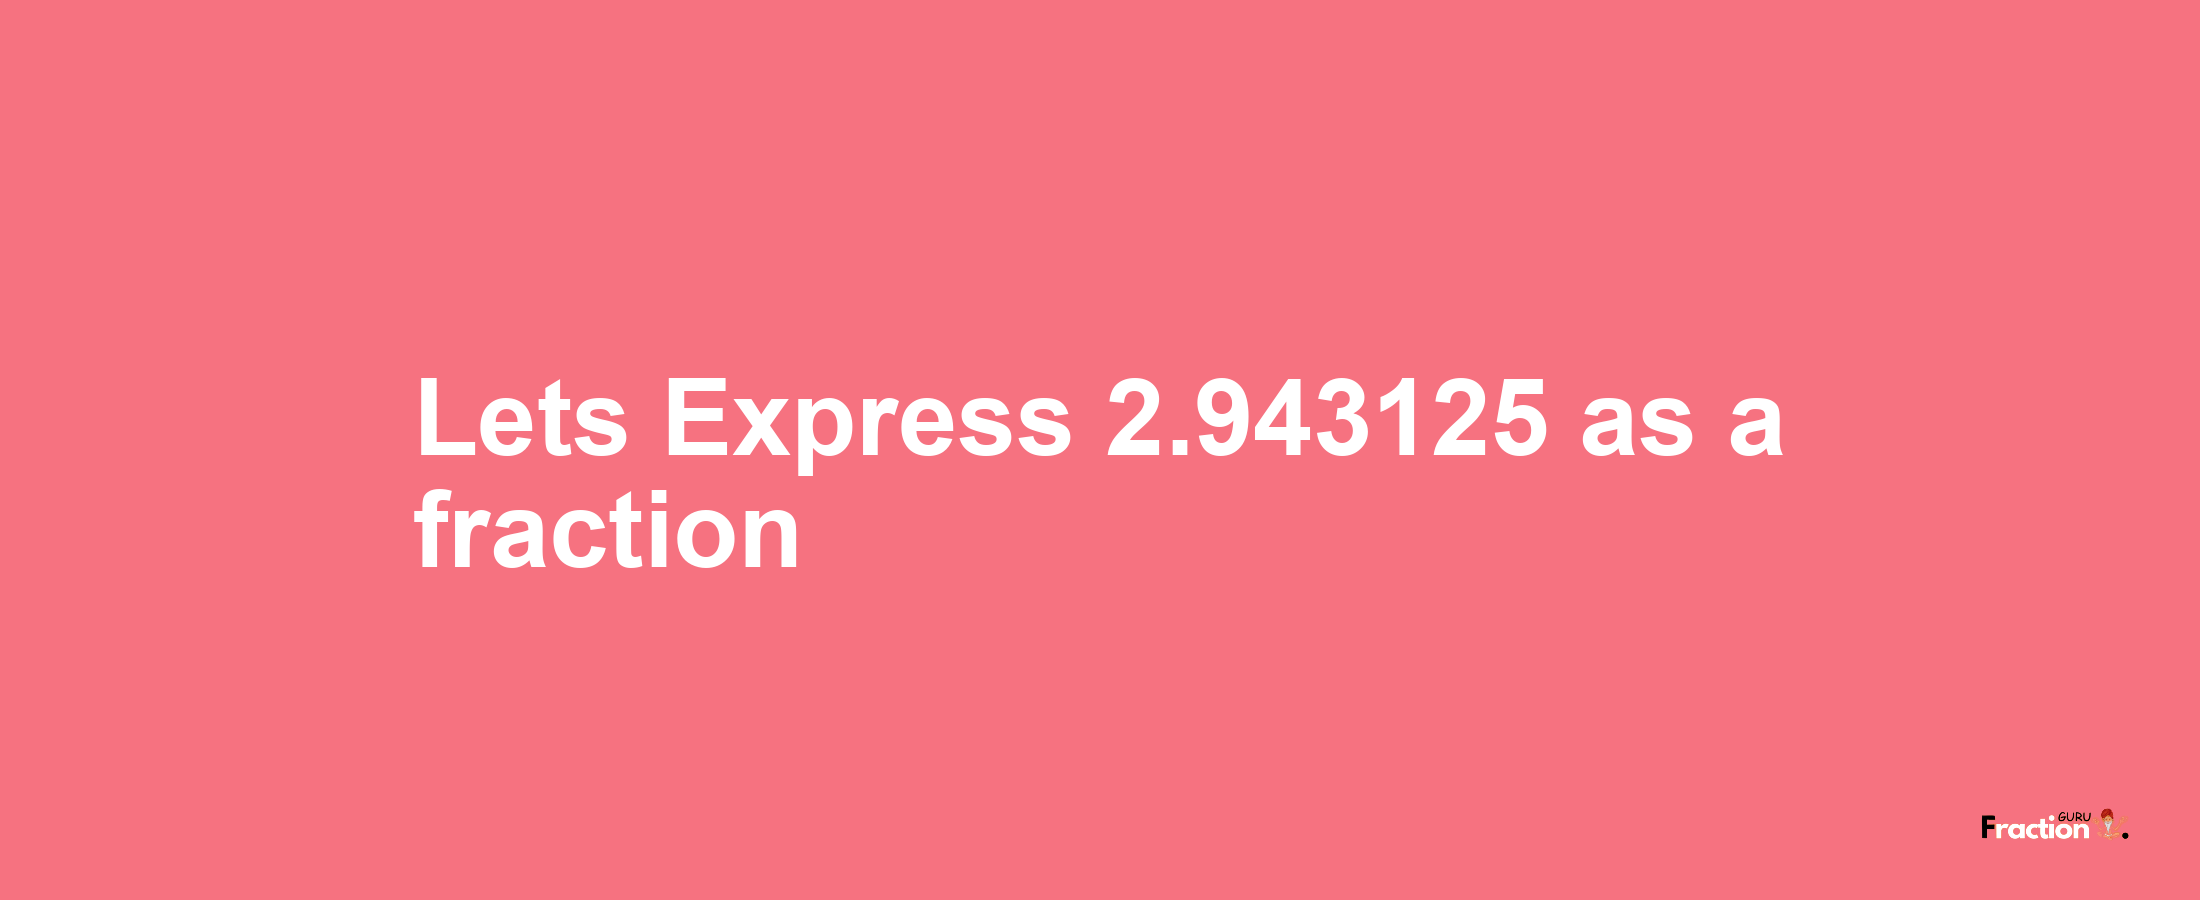 Lets Express 2.943125 as afraction